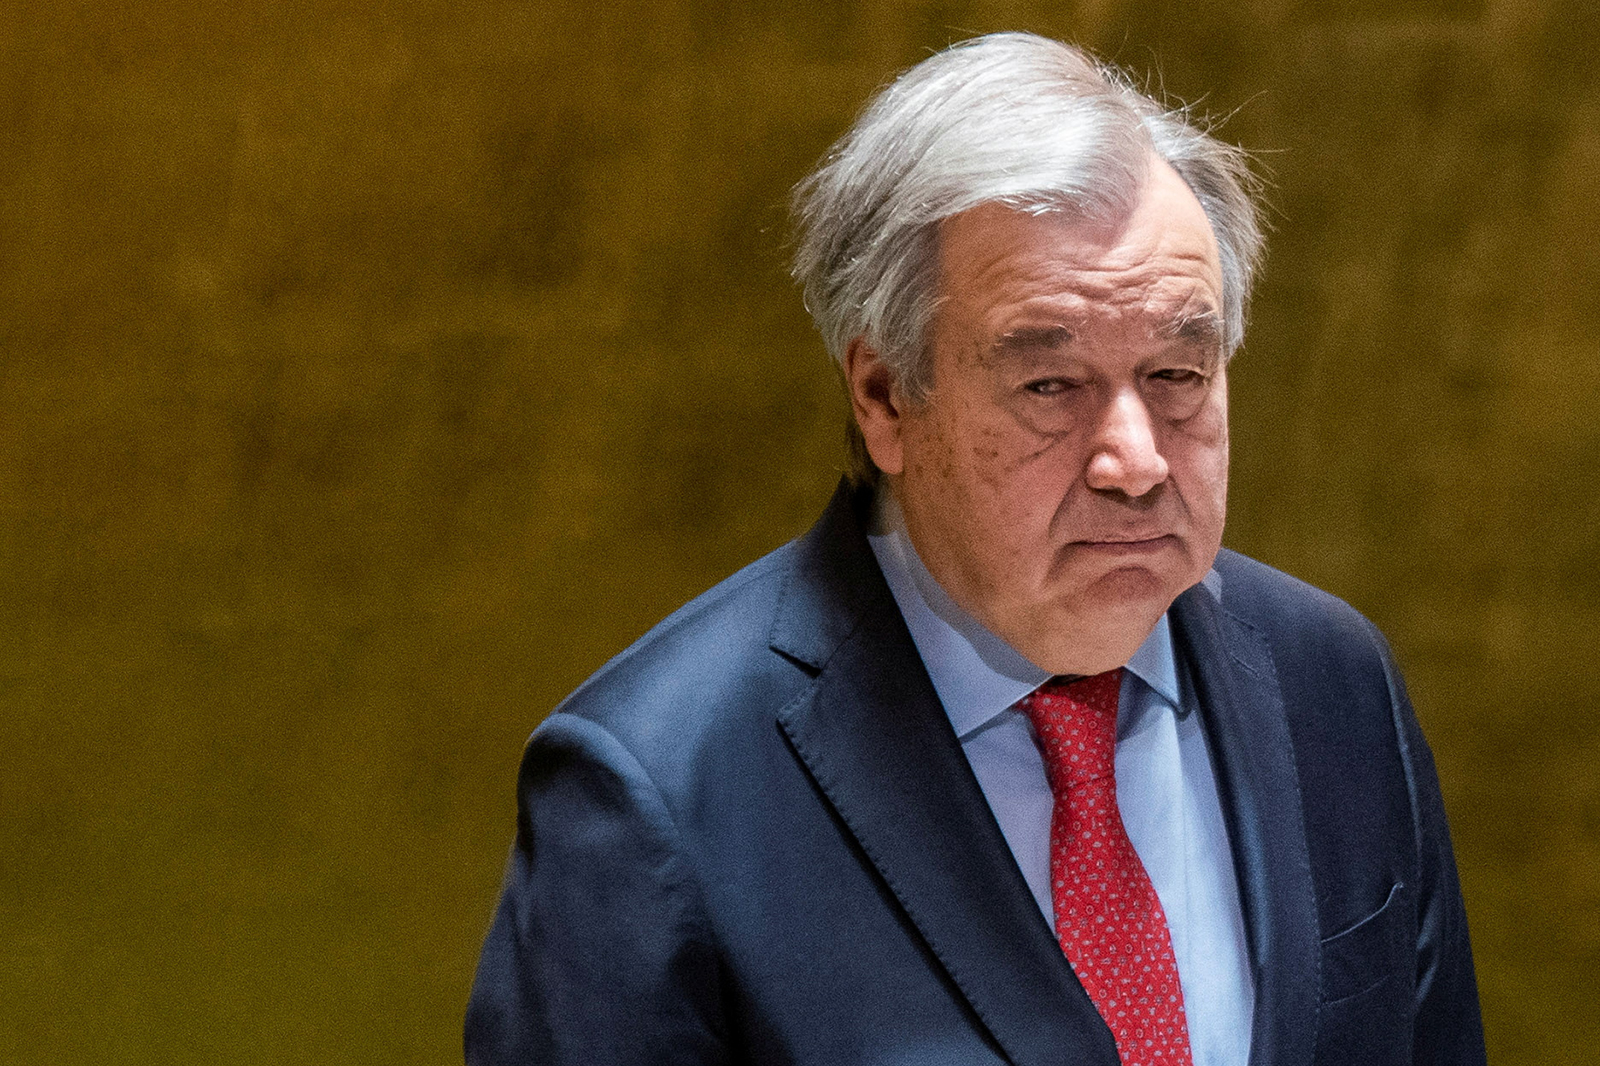 United Nations Secretary General Antonio Guterres attends a minute of silence for the victims of the earthquake in Turkey and Syria during the 58th plenary meeting at the United Nations headquarters in New York.